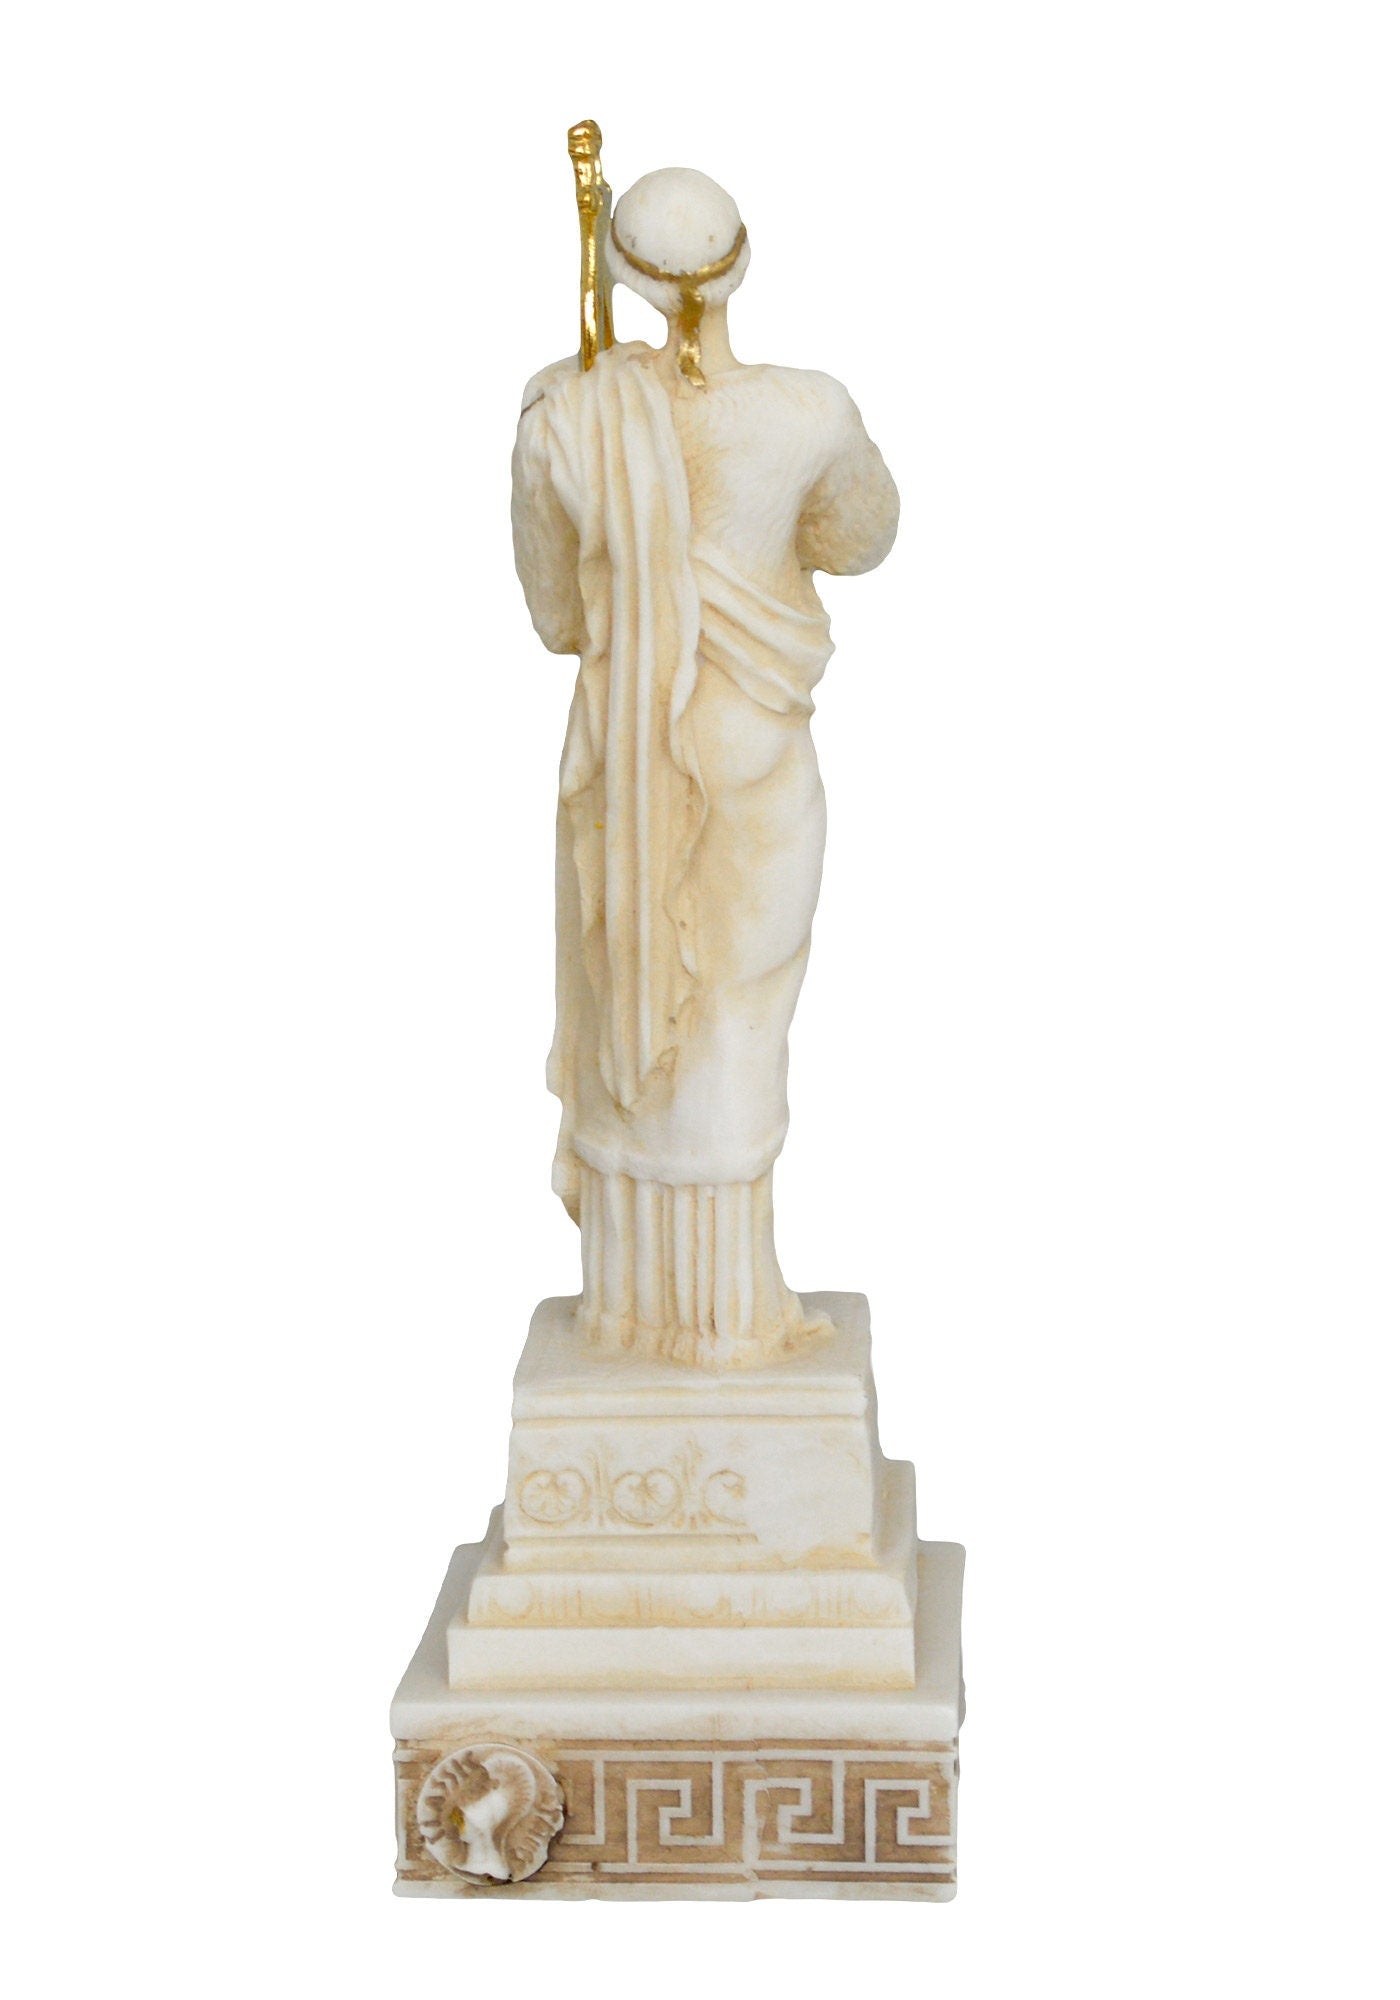 Apollo - Greek Roman God of the Sun,Light,Music,Poetry,Healing,Prophecy,Knowledge,Order,Beauty,Archery,Agriculture- Aged Alabaster Statue